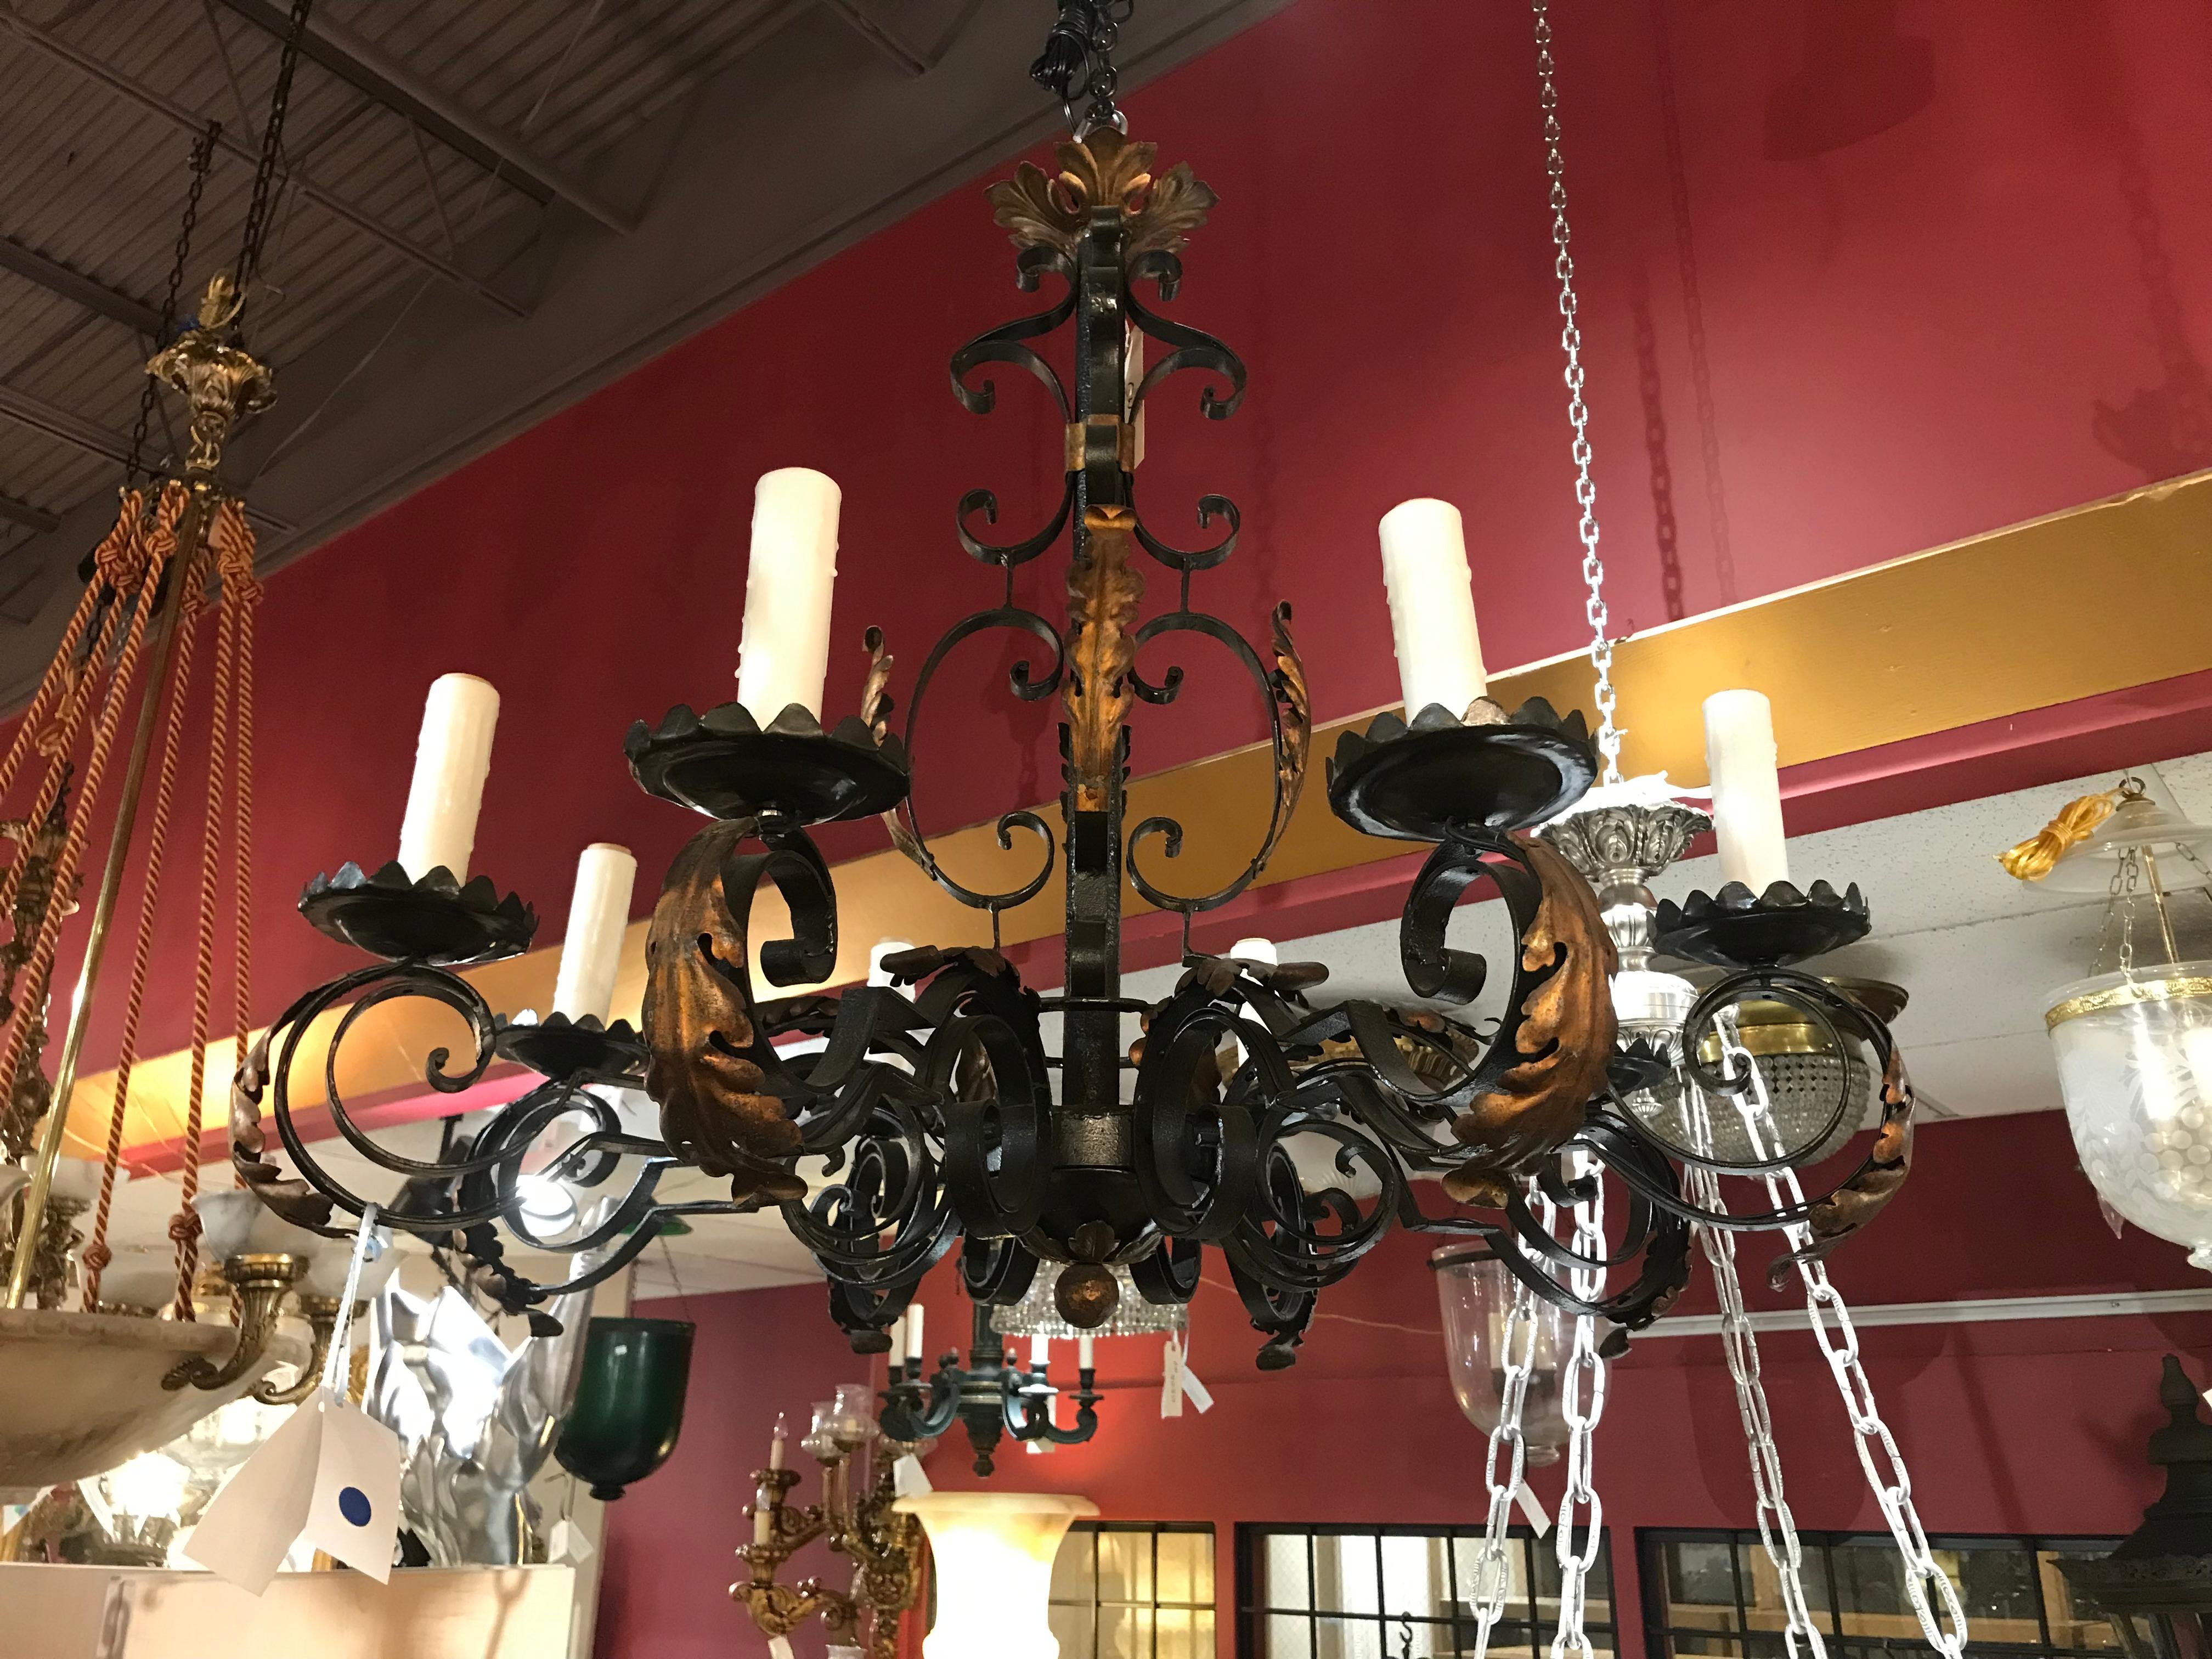 A fine 19th century iron chandelier, originally for candles, now electrified.
CW4251.